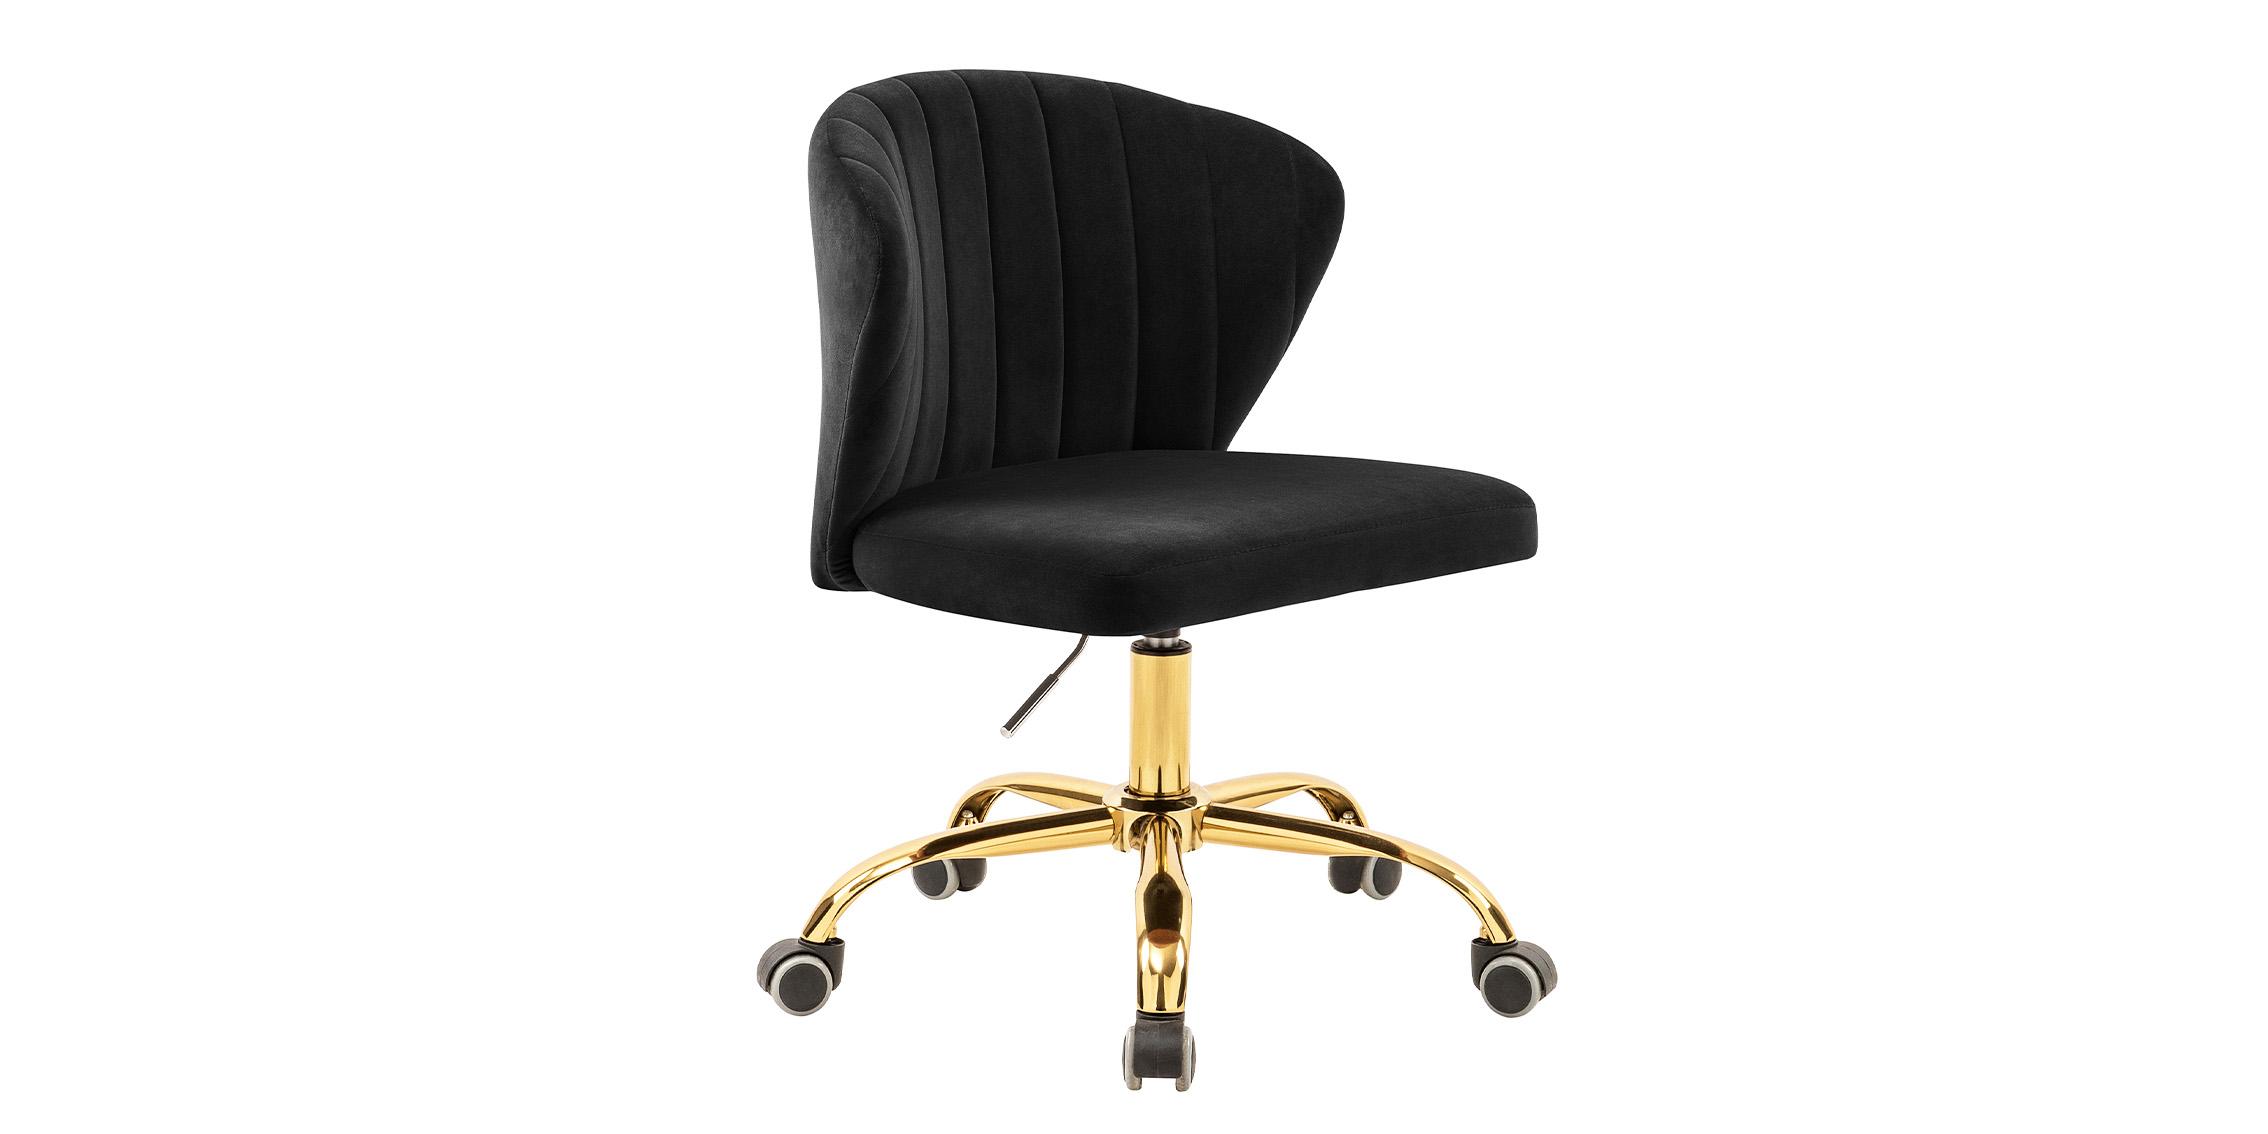 Contemporary, Modern Office Chair FINLEY 165Black 165Black in Gold, Black Fabric